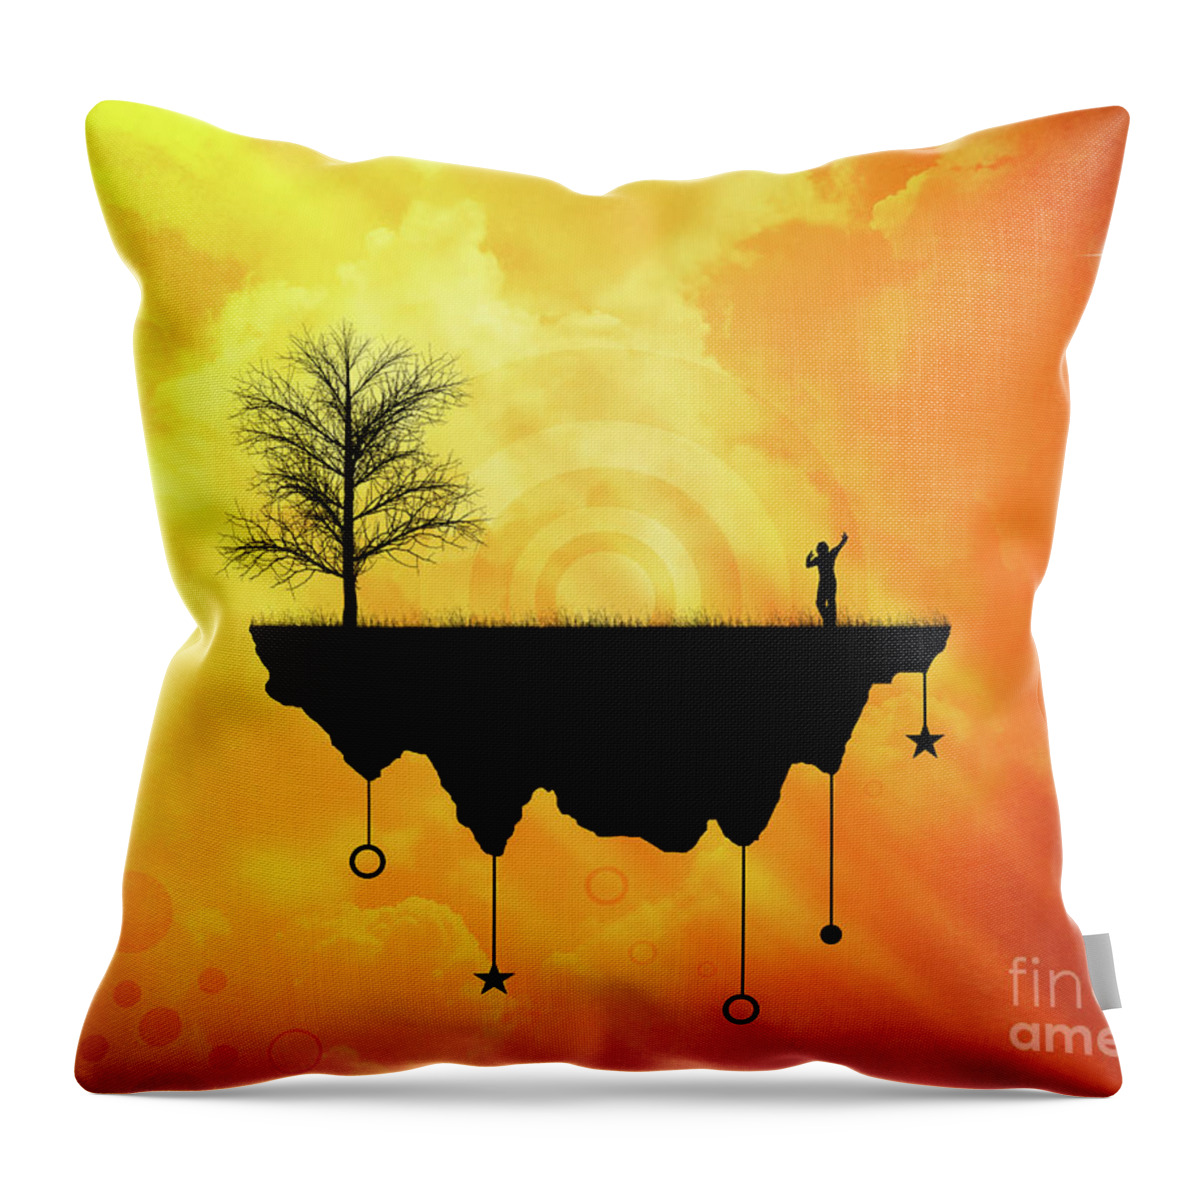 Surreal Throw Pillow featuring the digital art Slice of Earth by Phil Perkins